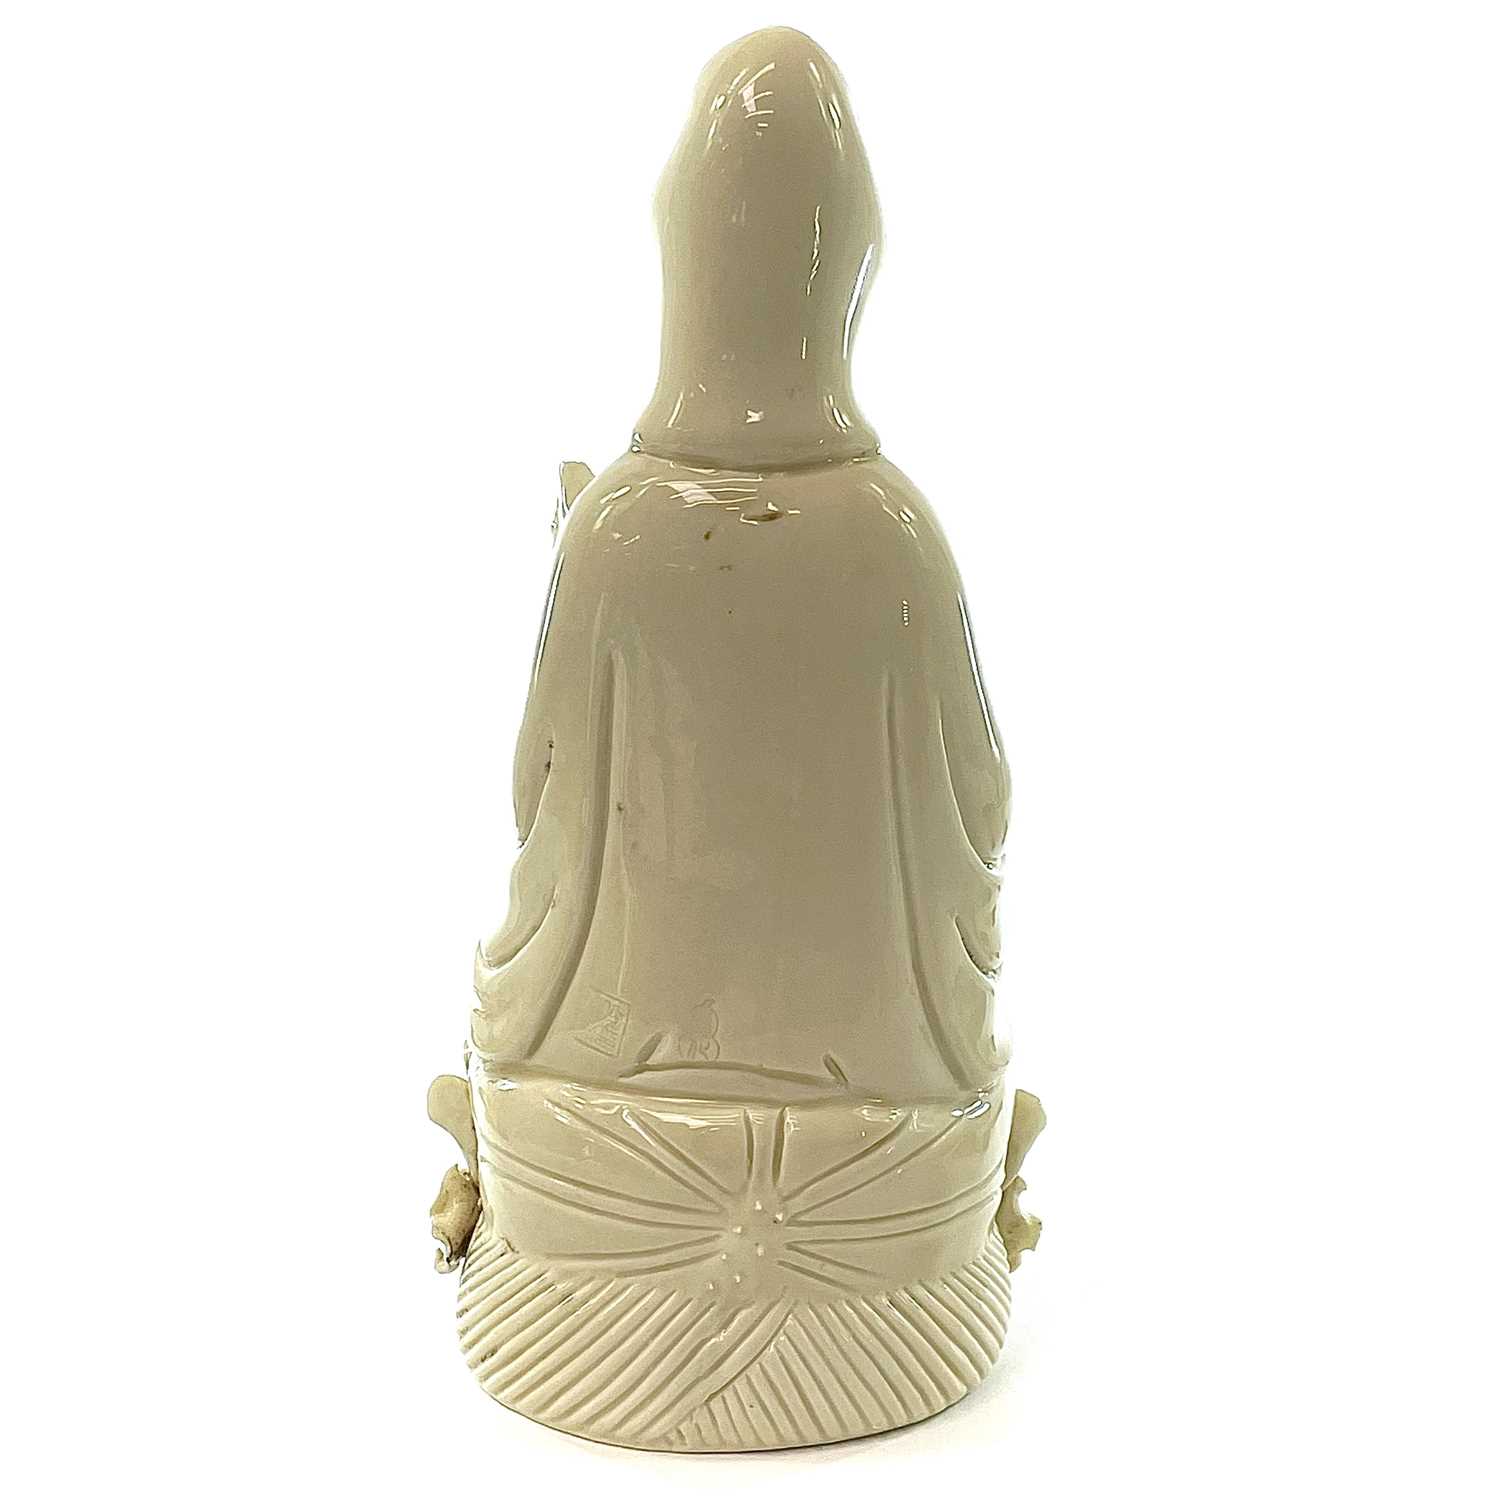 A Chinese blanc de chine figure of Guanyin, 20th century, seated with one leg raised resting her arm - Image 2 of 7